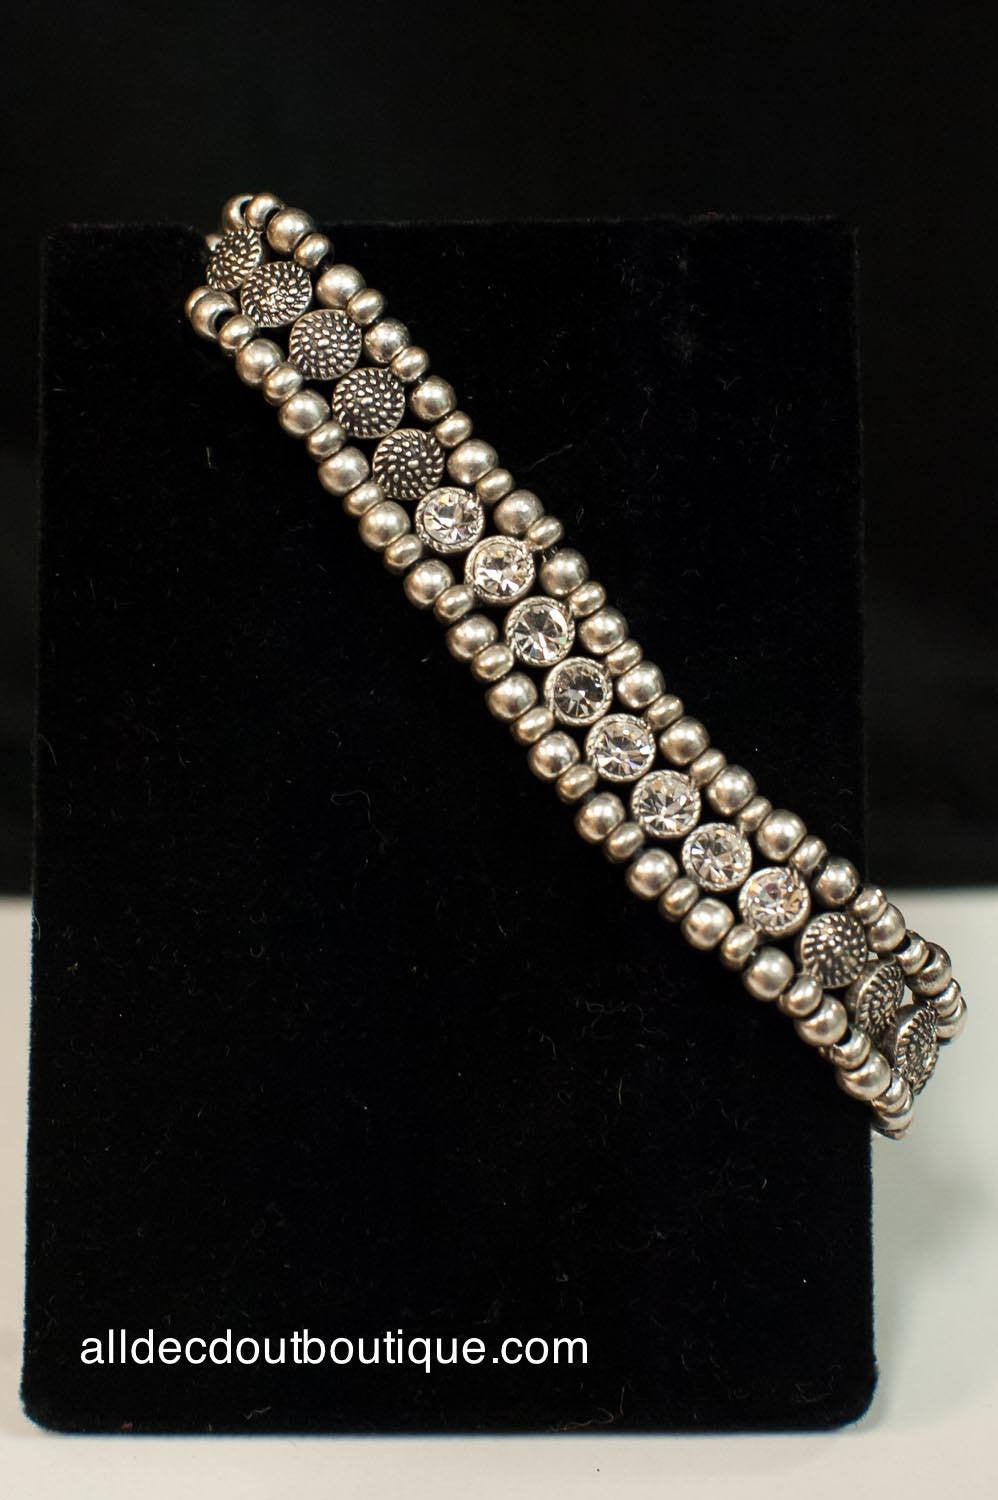 ADO | Beaded Adjustable Bracelet with Crystals - All Decd Out